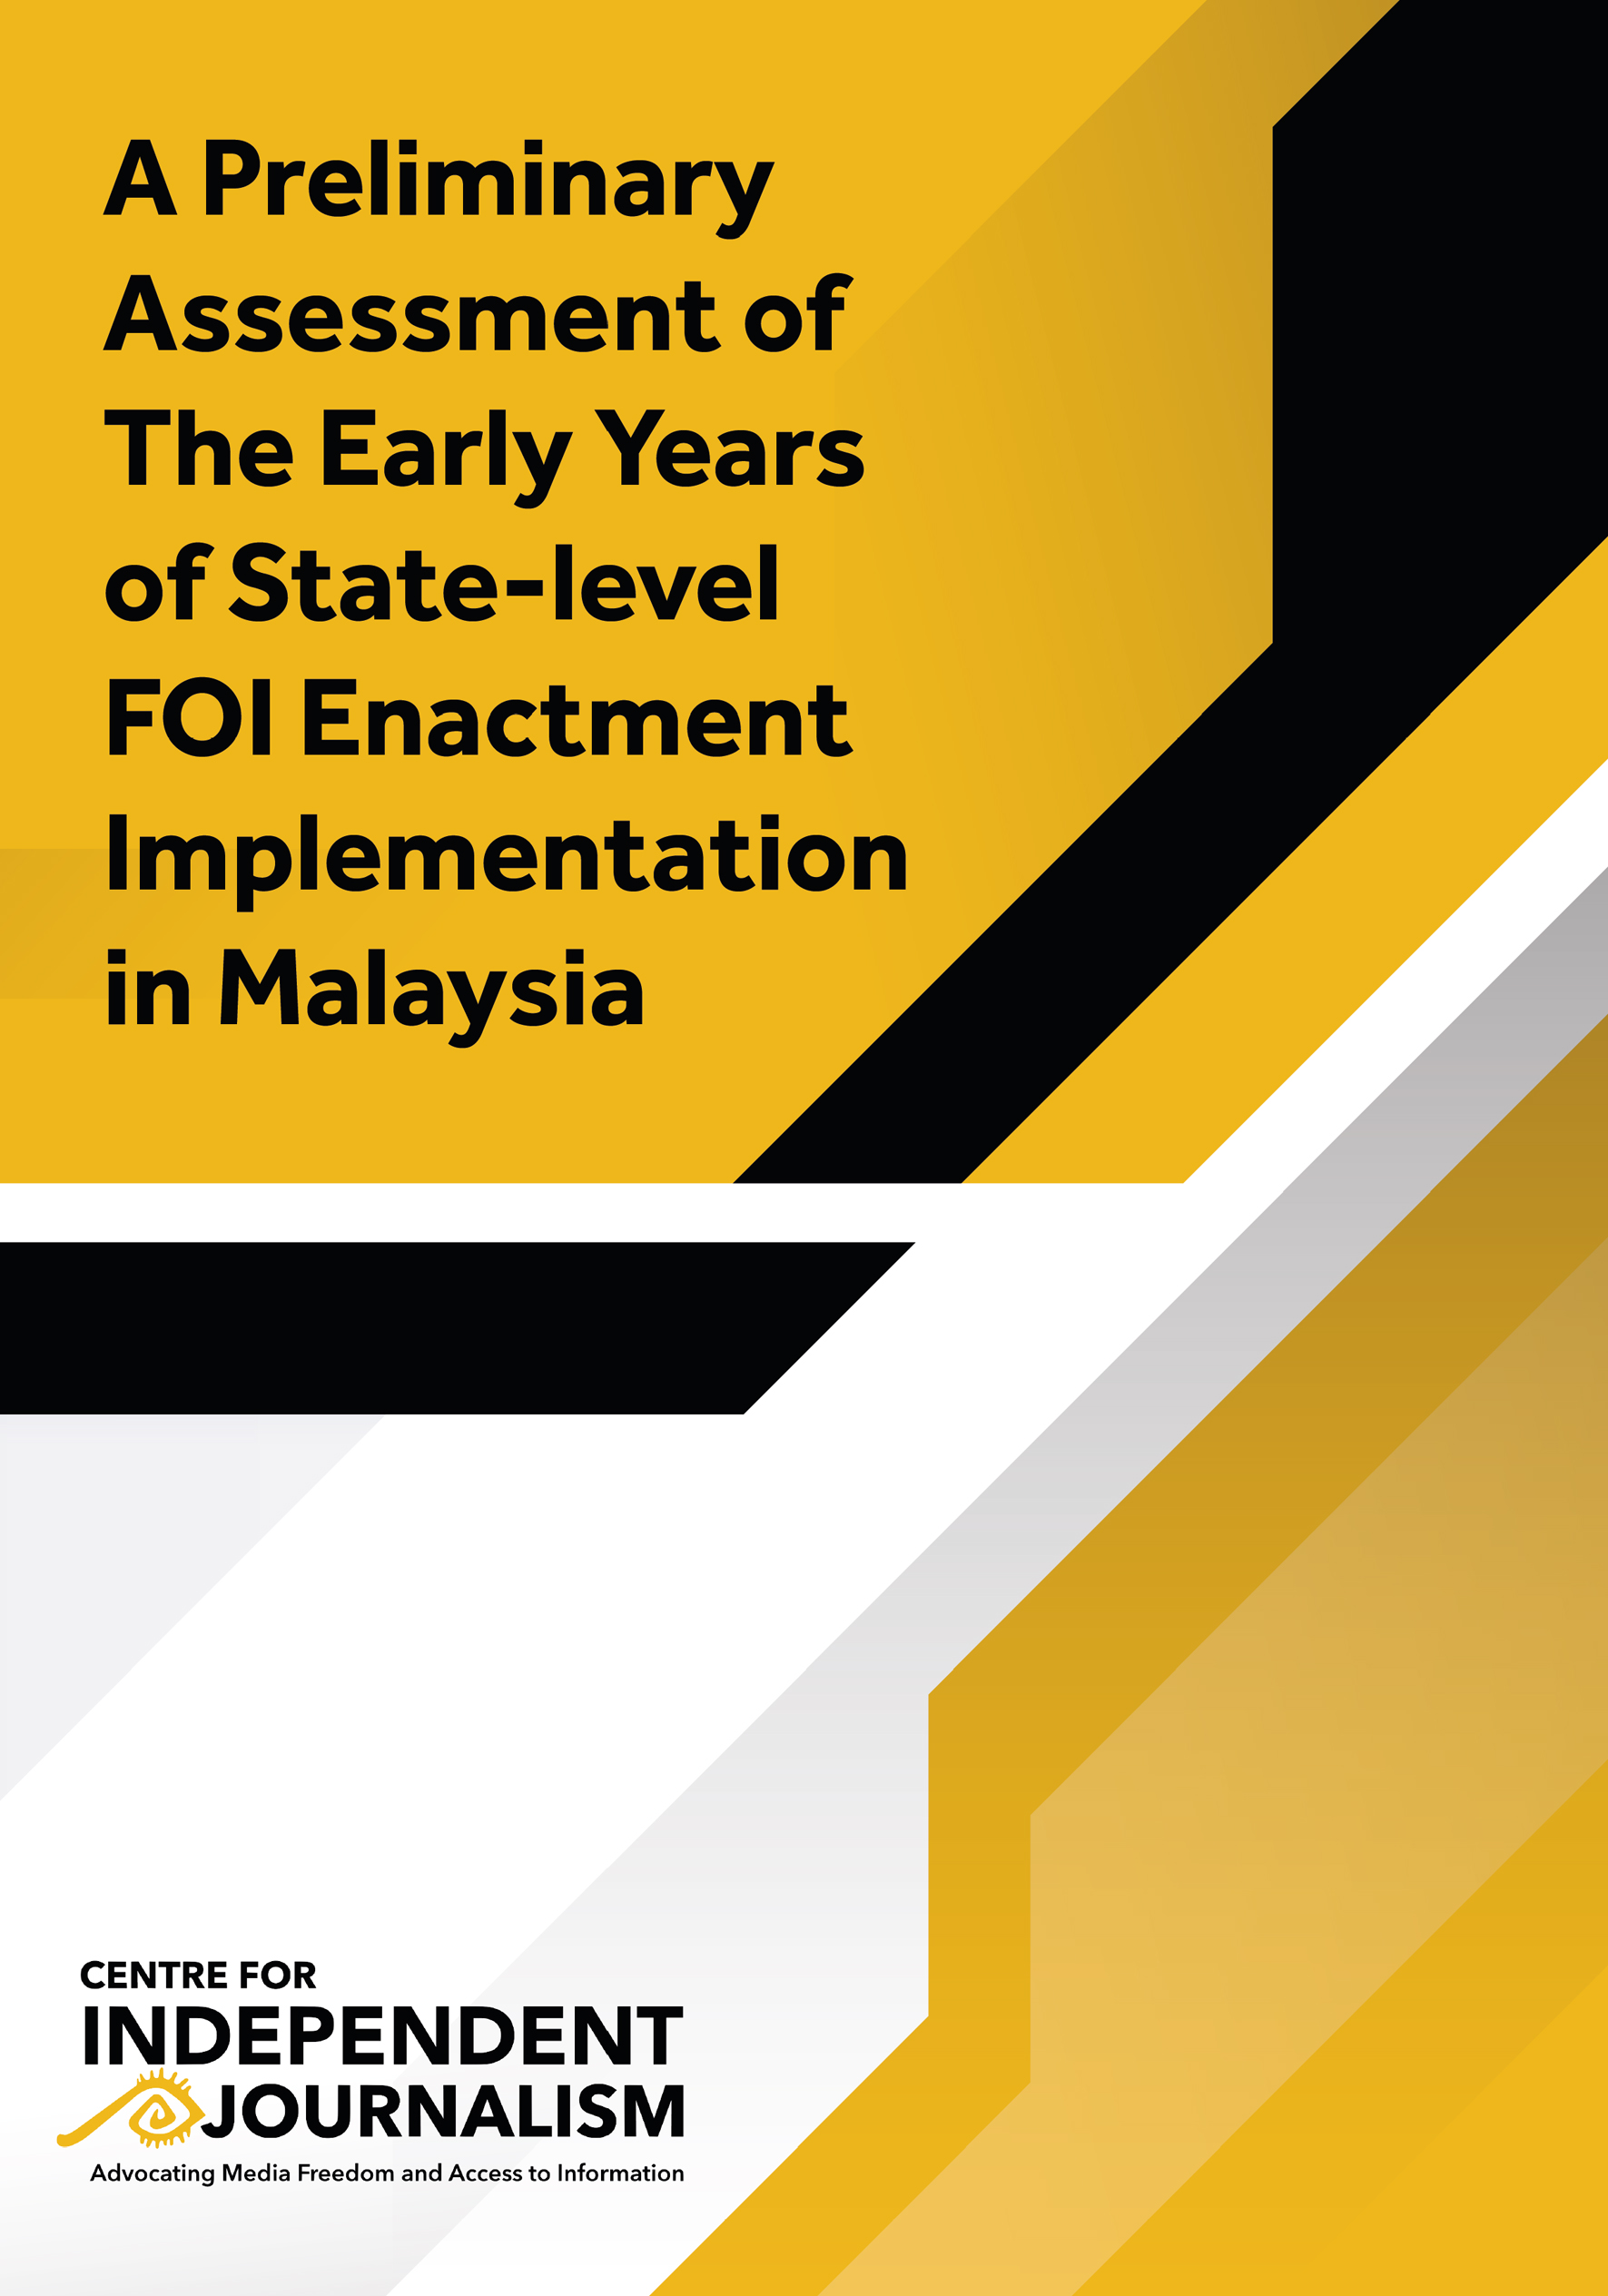 A Preliminary Assessment of The Early Years of State-level FOI Enactment Implementation in Malaysia